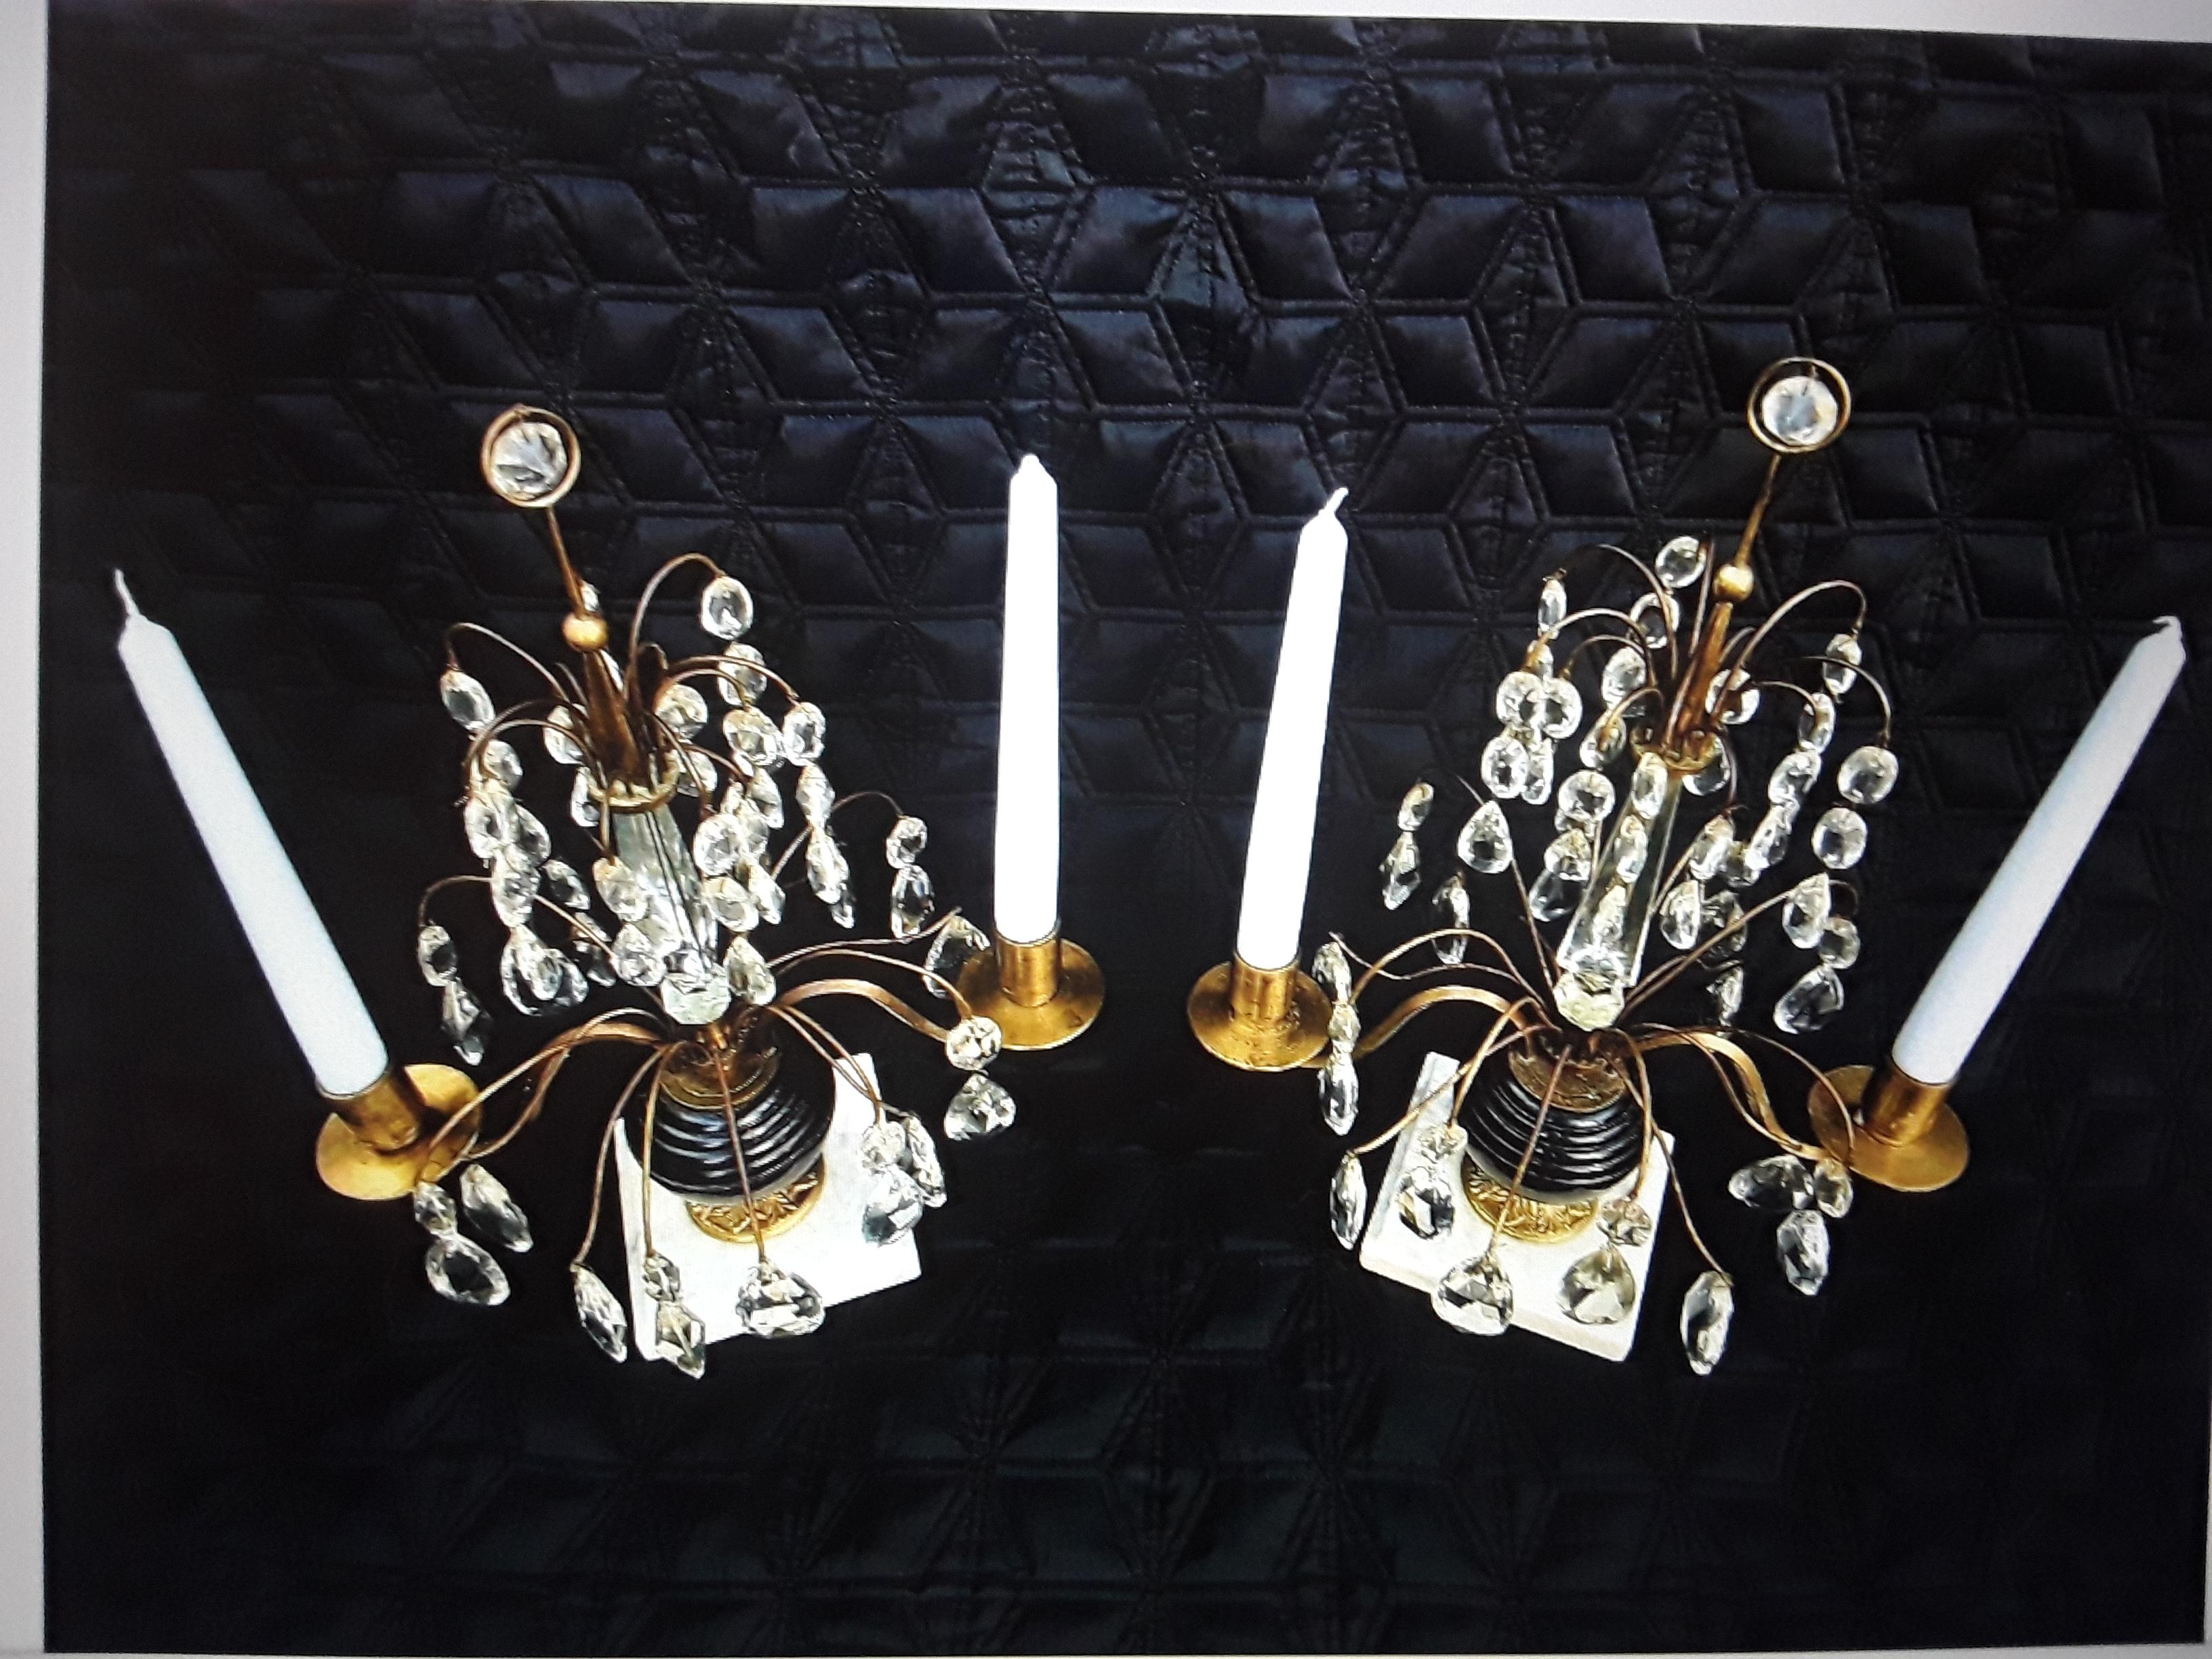 Early 19th Century Pair Early 19thc Baltic Neoclassical style Ormolu w/ Cobalt Glass Candelabra For Sale